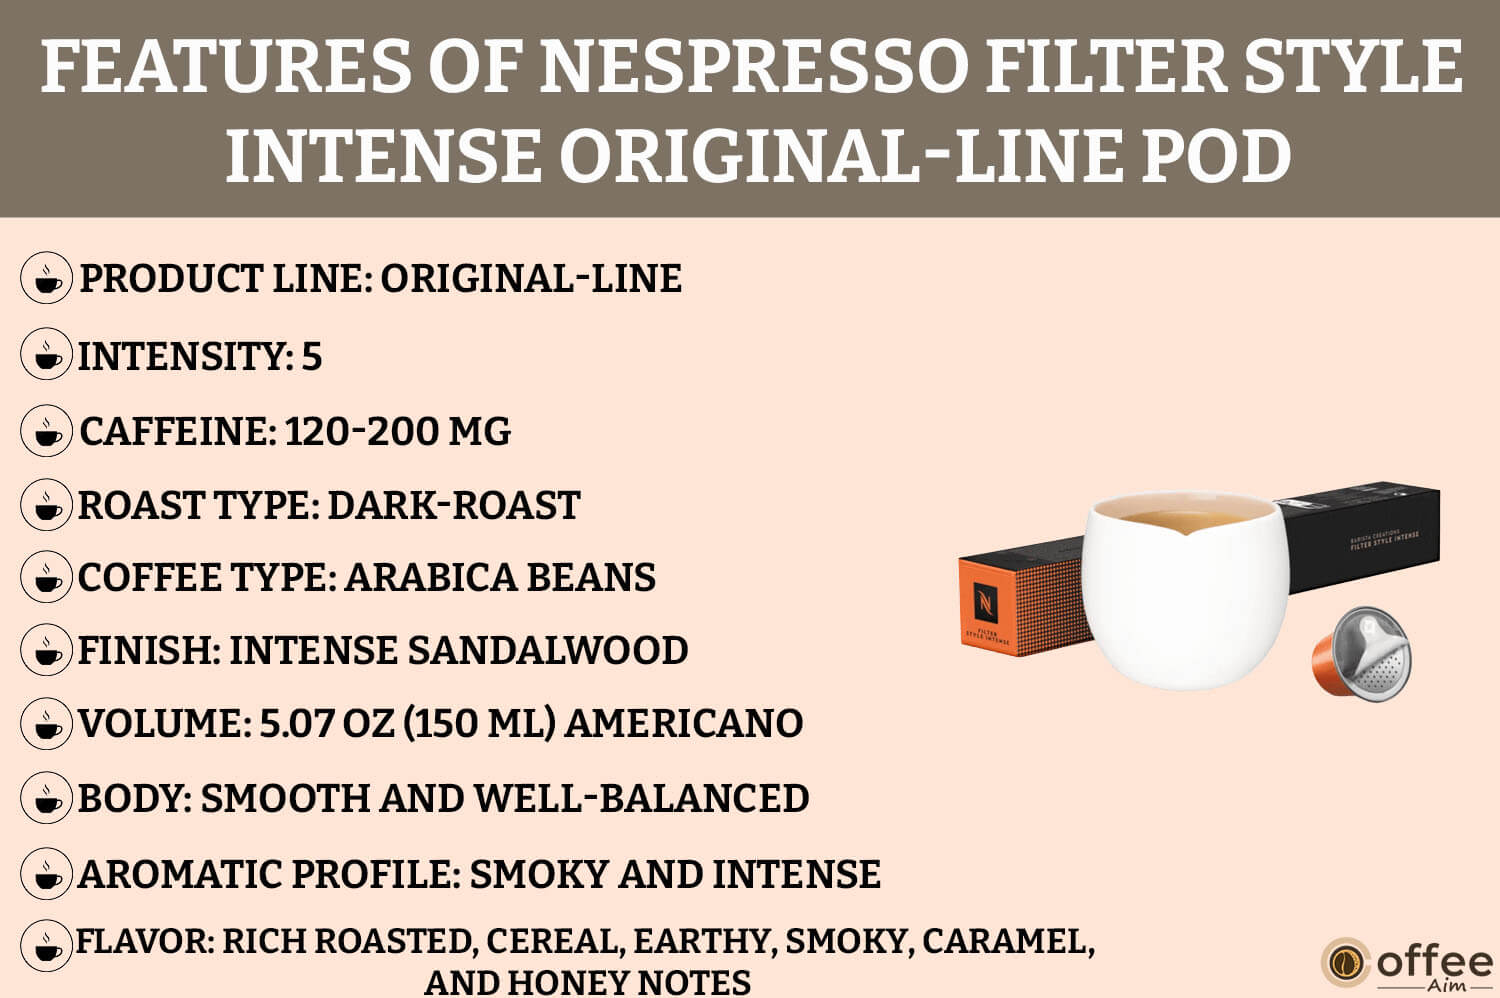 This image highlights the features of the Filter Style Intense Nespresso OriginalLine Pod in our review.